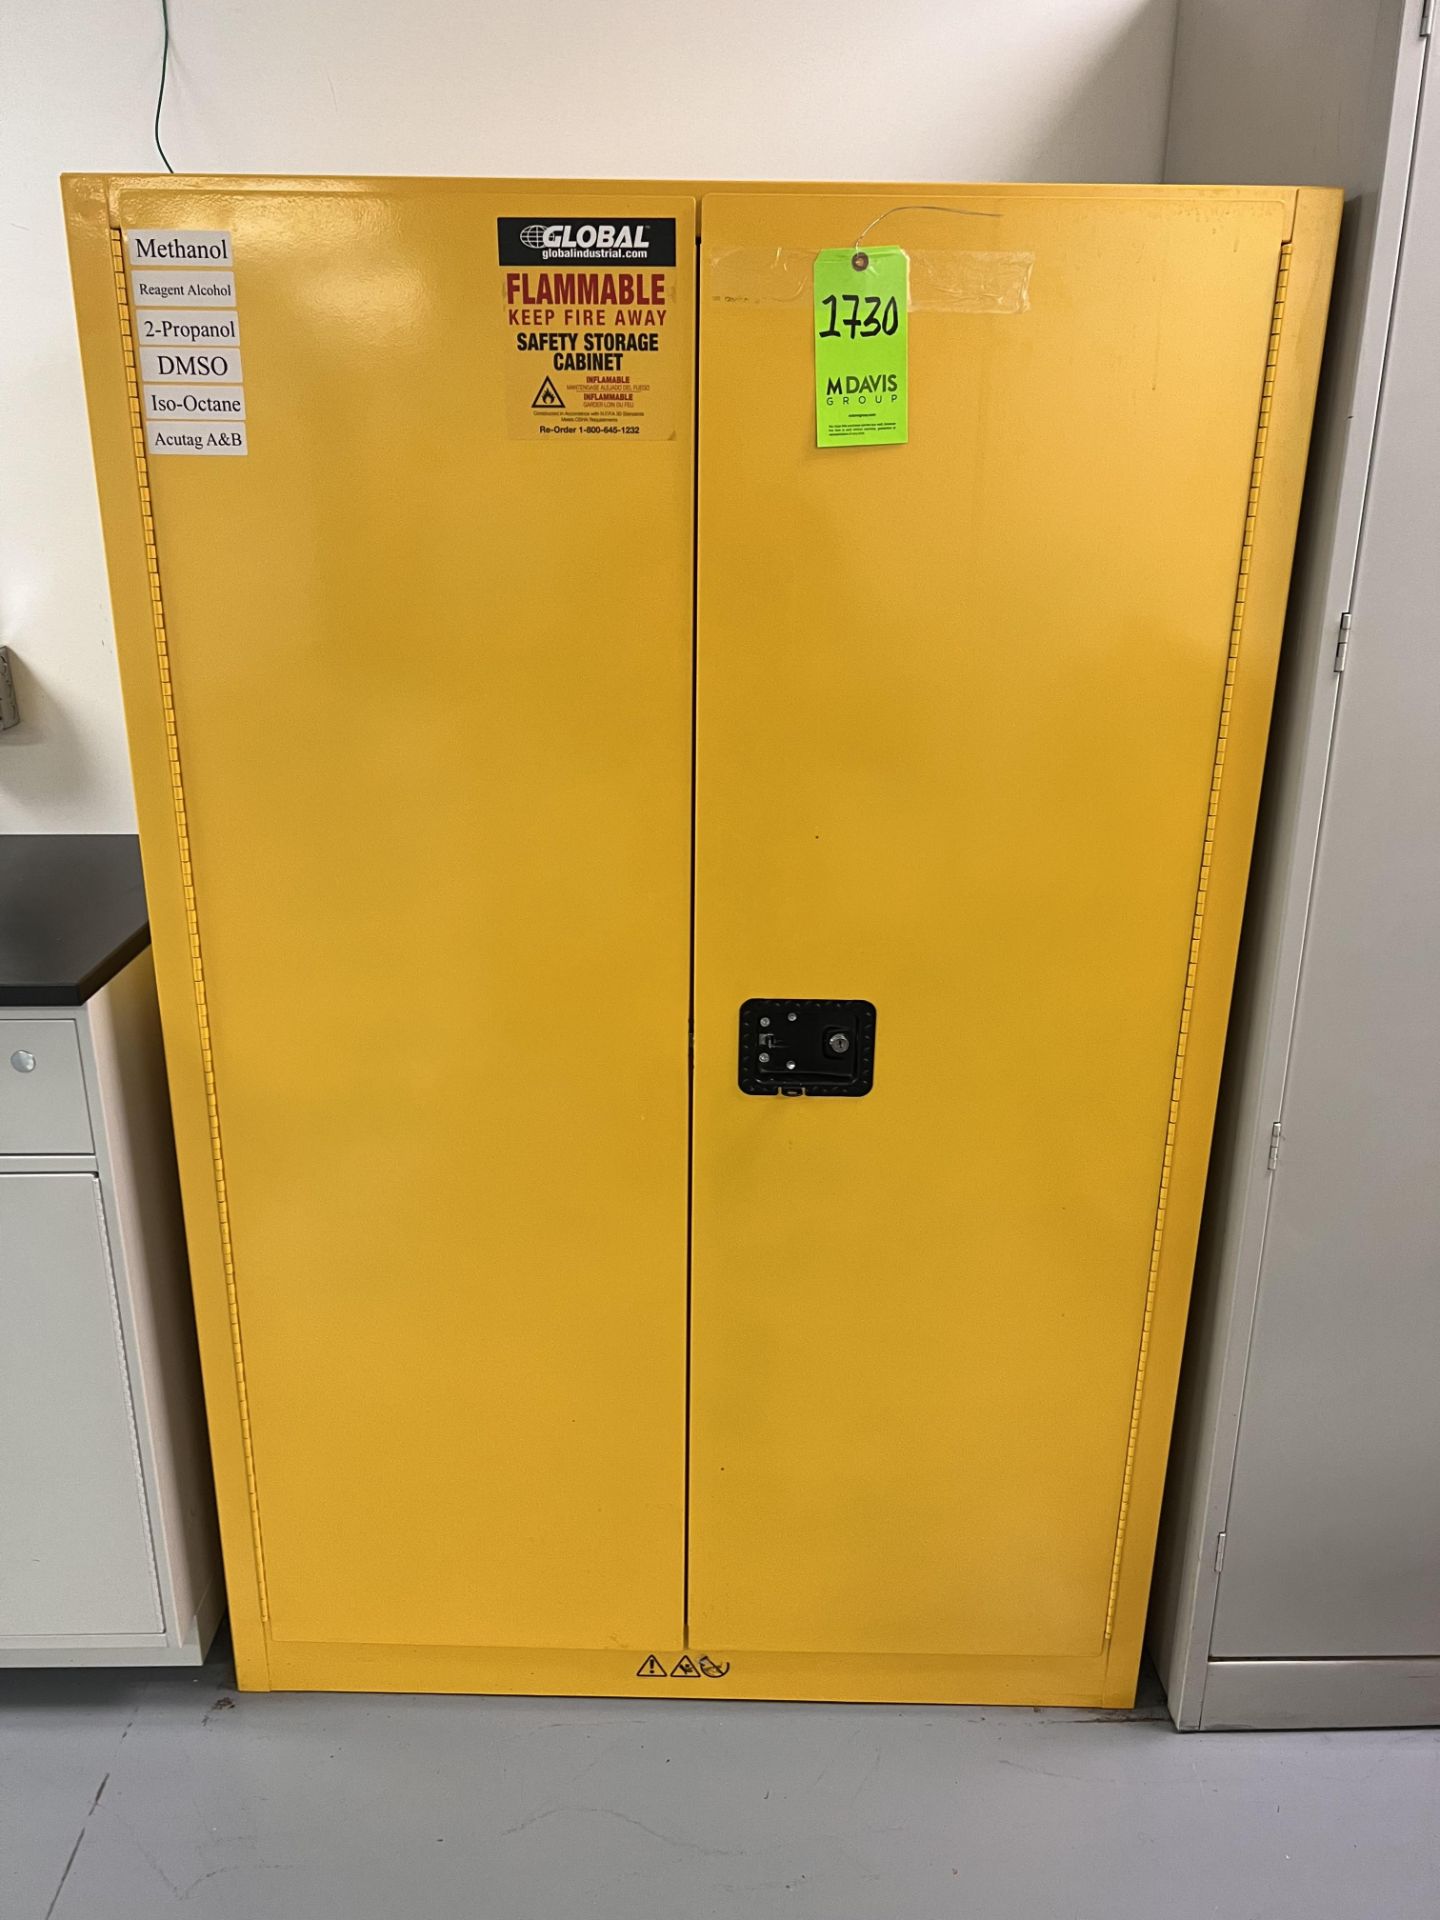 GLOBAL INDUSTRIAL SAFETY STORAGE CABINET FOR FLAMMABLE LIQUIDS, MODEL 298541